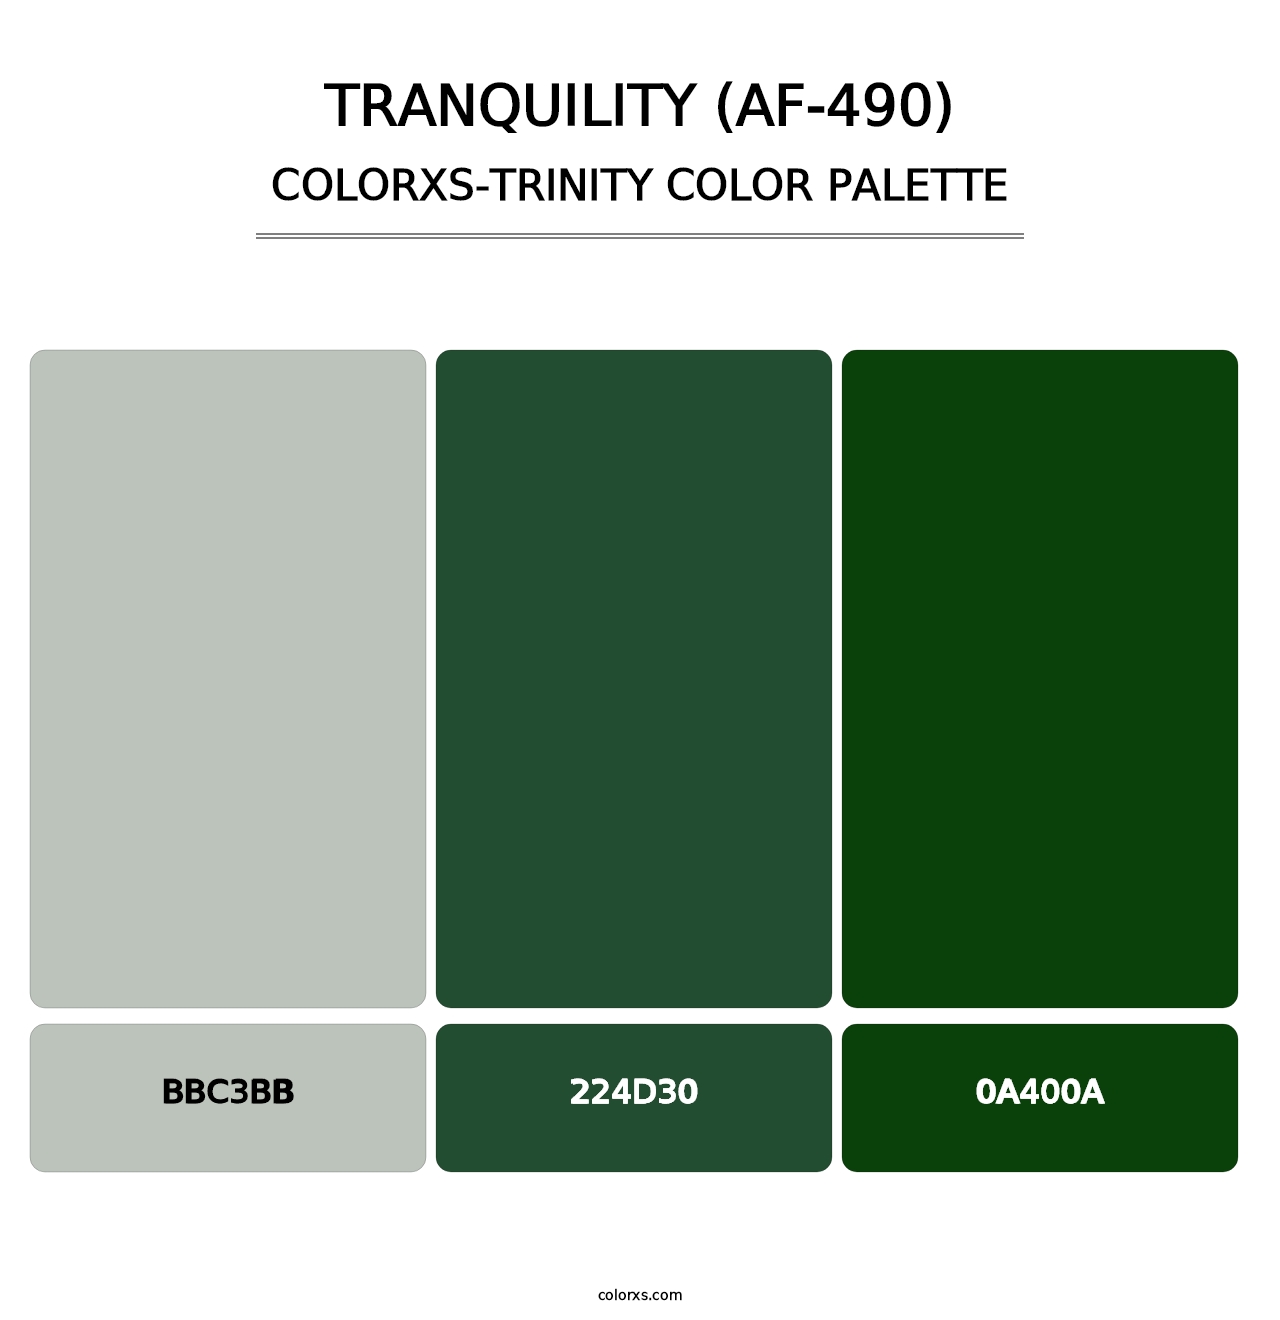 Tranquility (AF-490) - Colorxs Trinity Palette